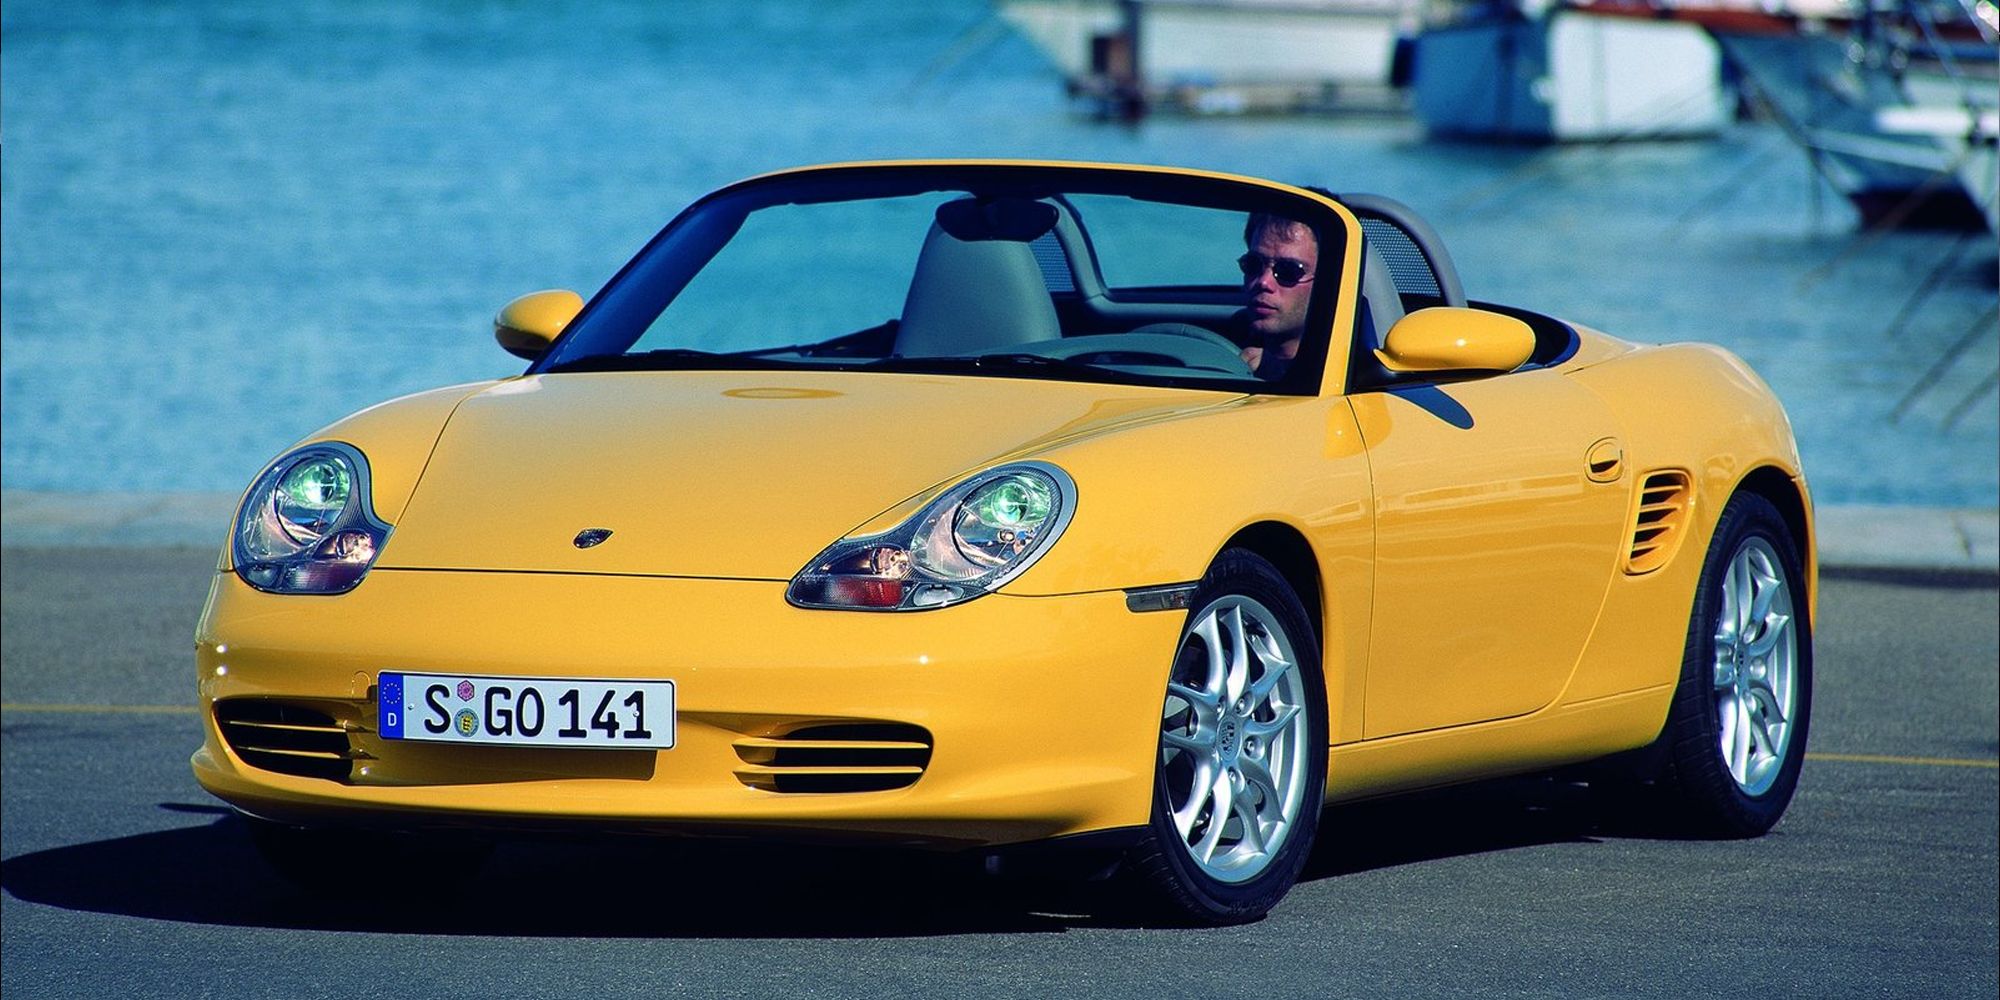 Front 3/4 view of a yellow Boxster, roof down